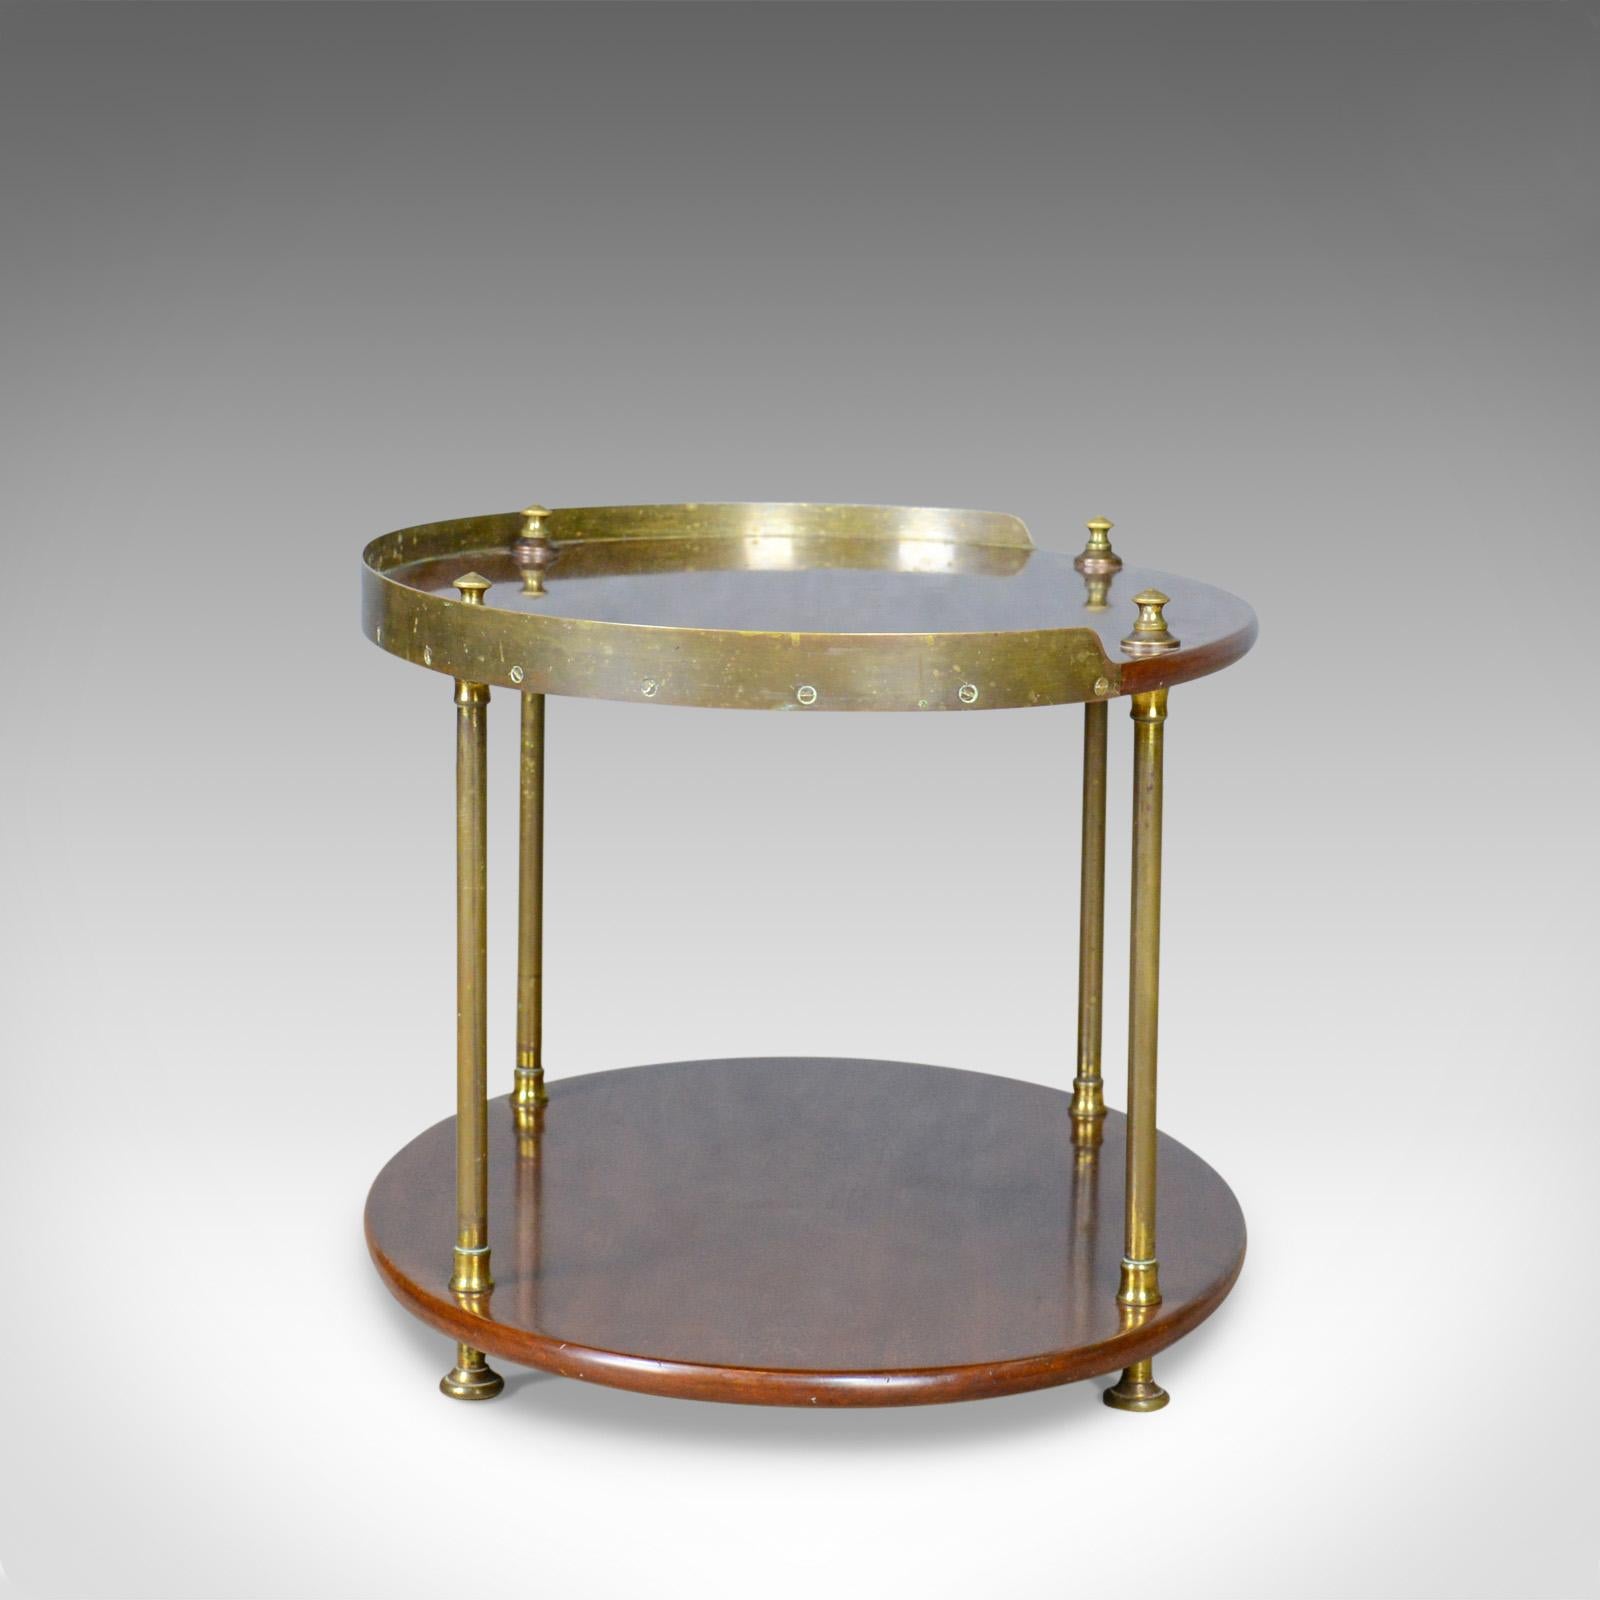 This is an antique ship's table, an English, solid mahogany and brass, two-tier side table dating to the Edwardian period of the early 20th century, circa 1910.

Beautifully crafted in select mahogany and turned brass.
Attractive rich, dark tones